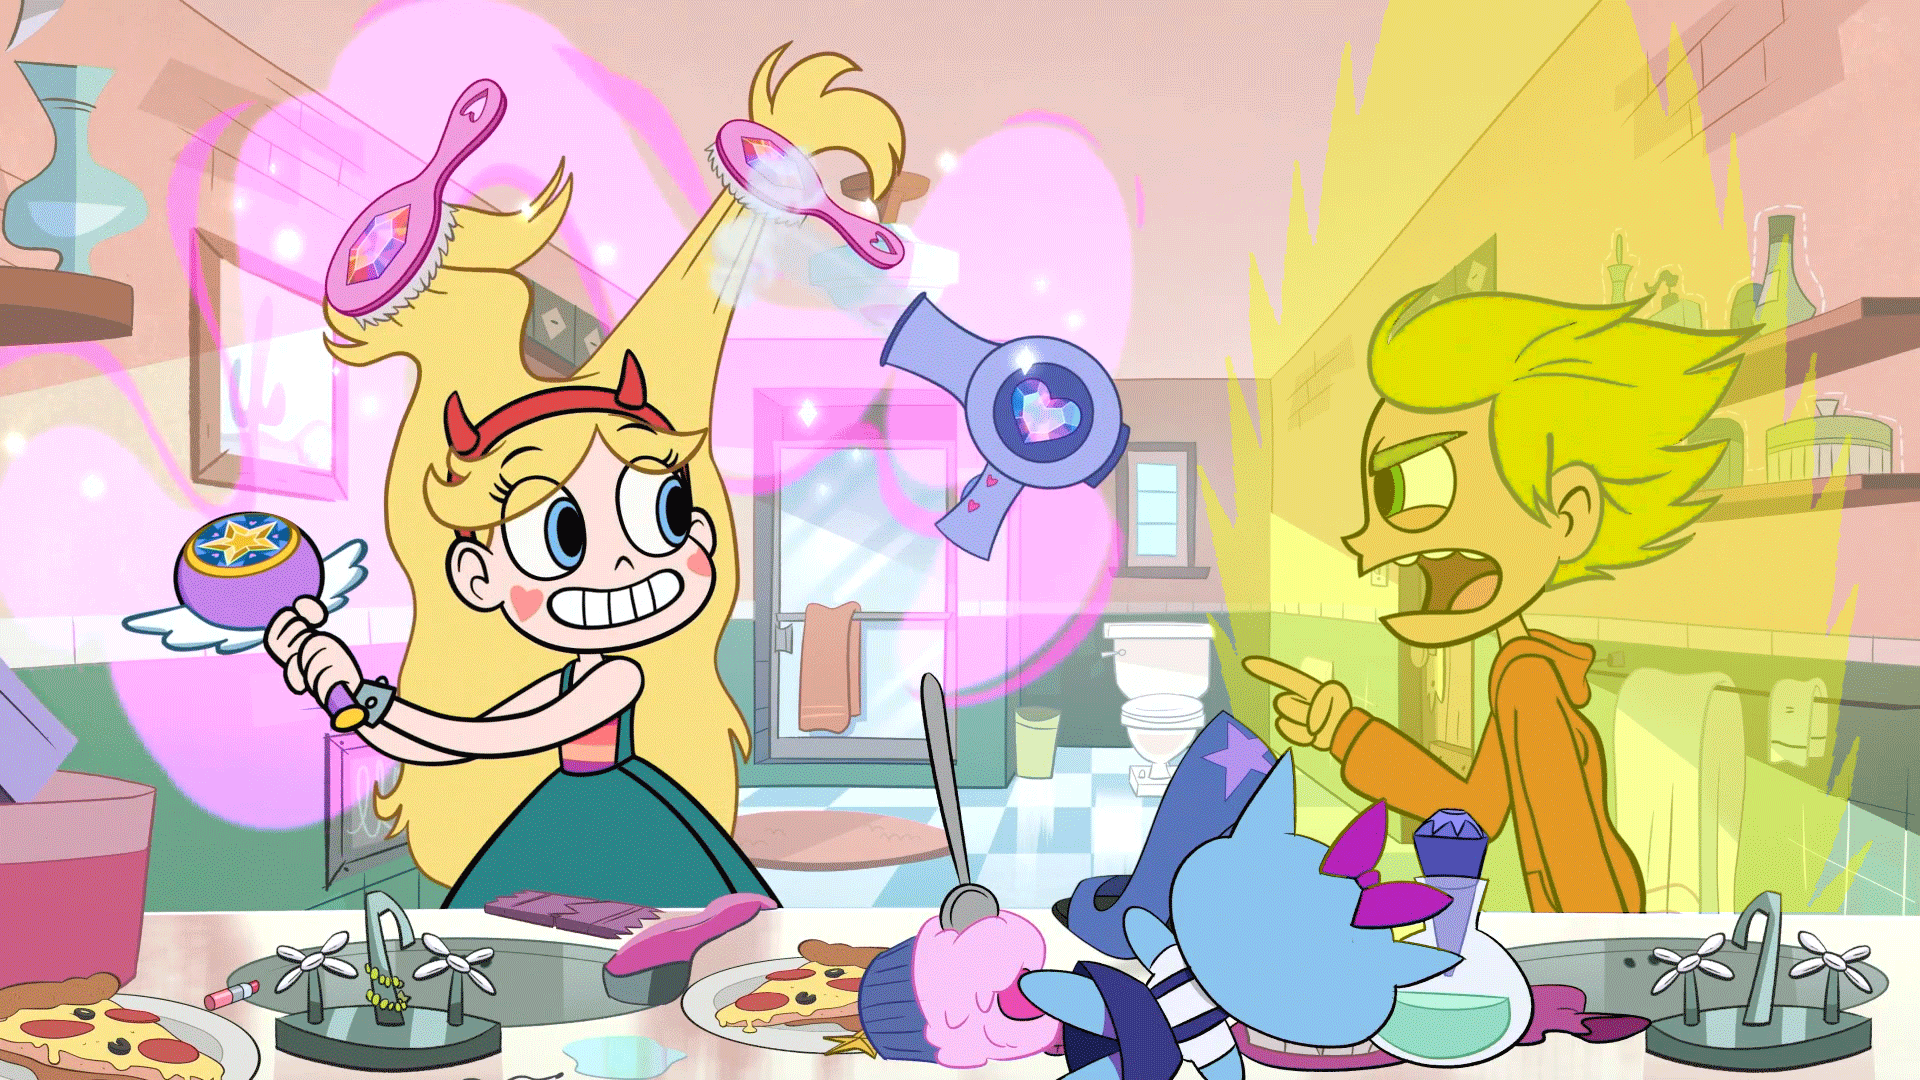 This isn't even my final form!. Star vs. the Forces of Evil